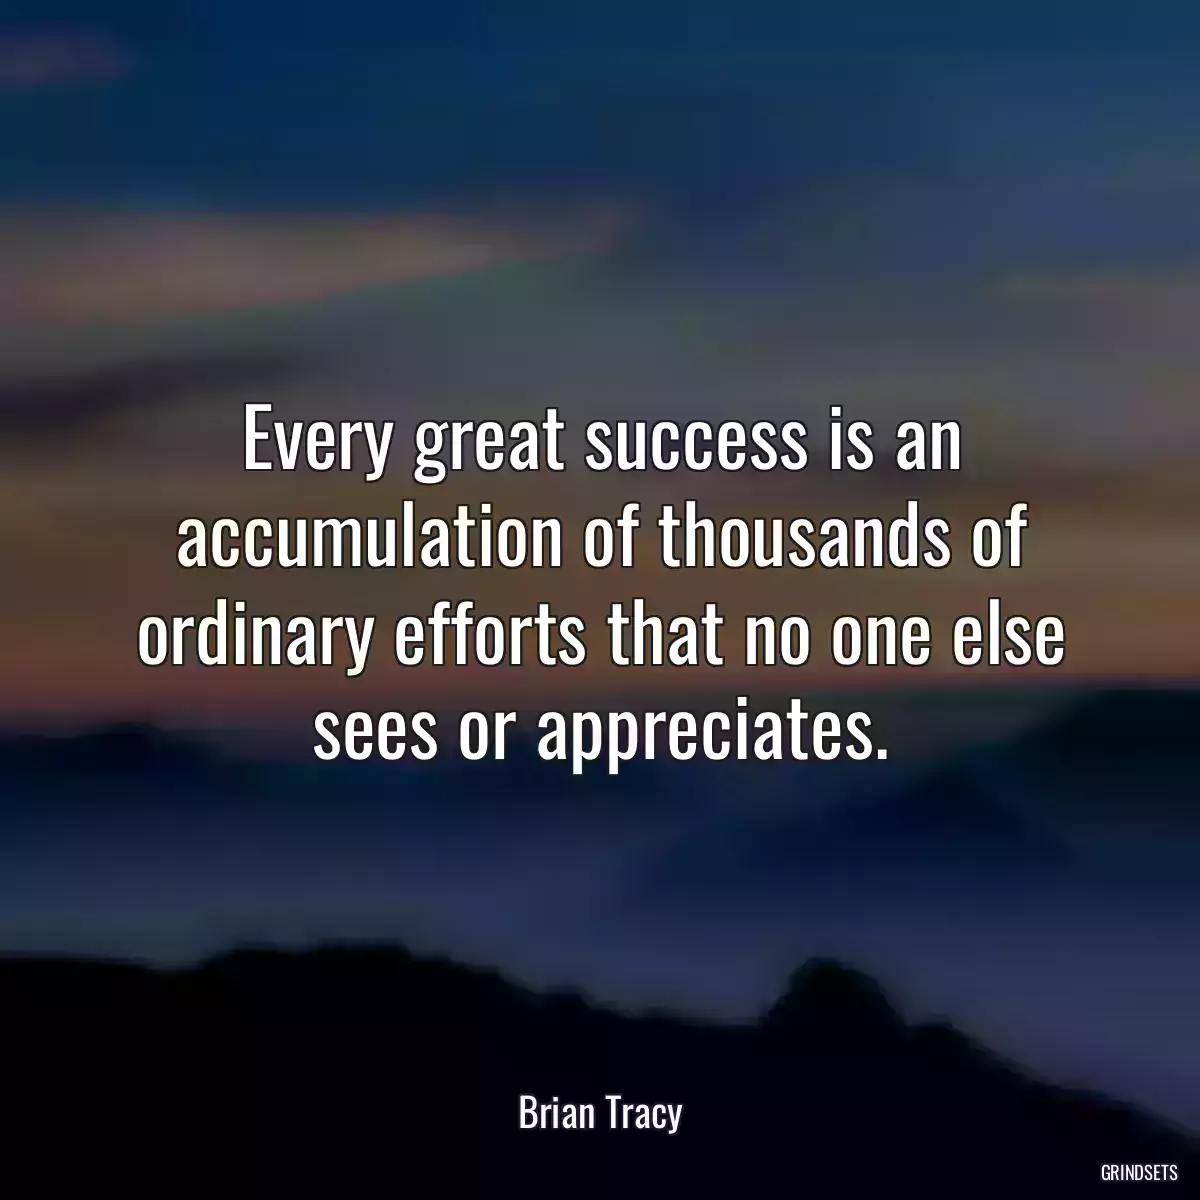 Every great success is an accumulation of thousands of ordinary efforts that no one else sees or appreciates.